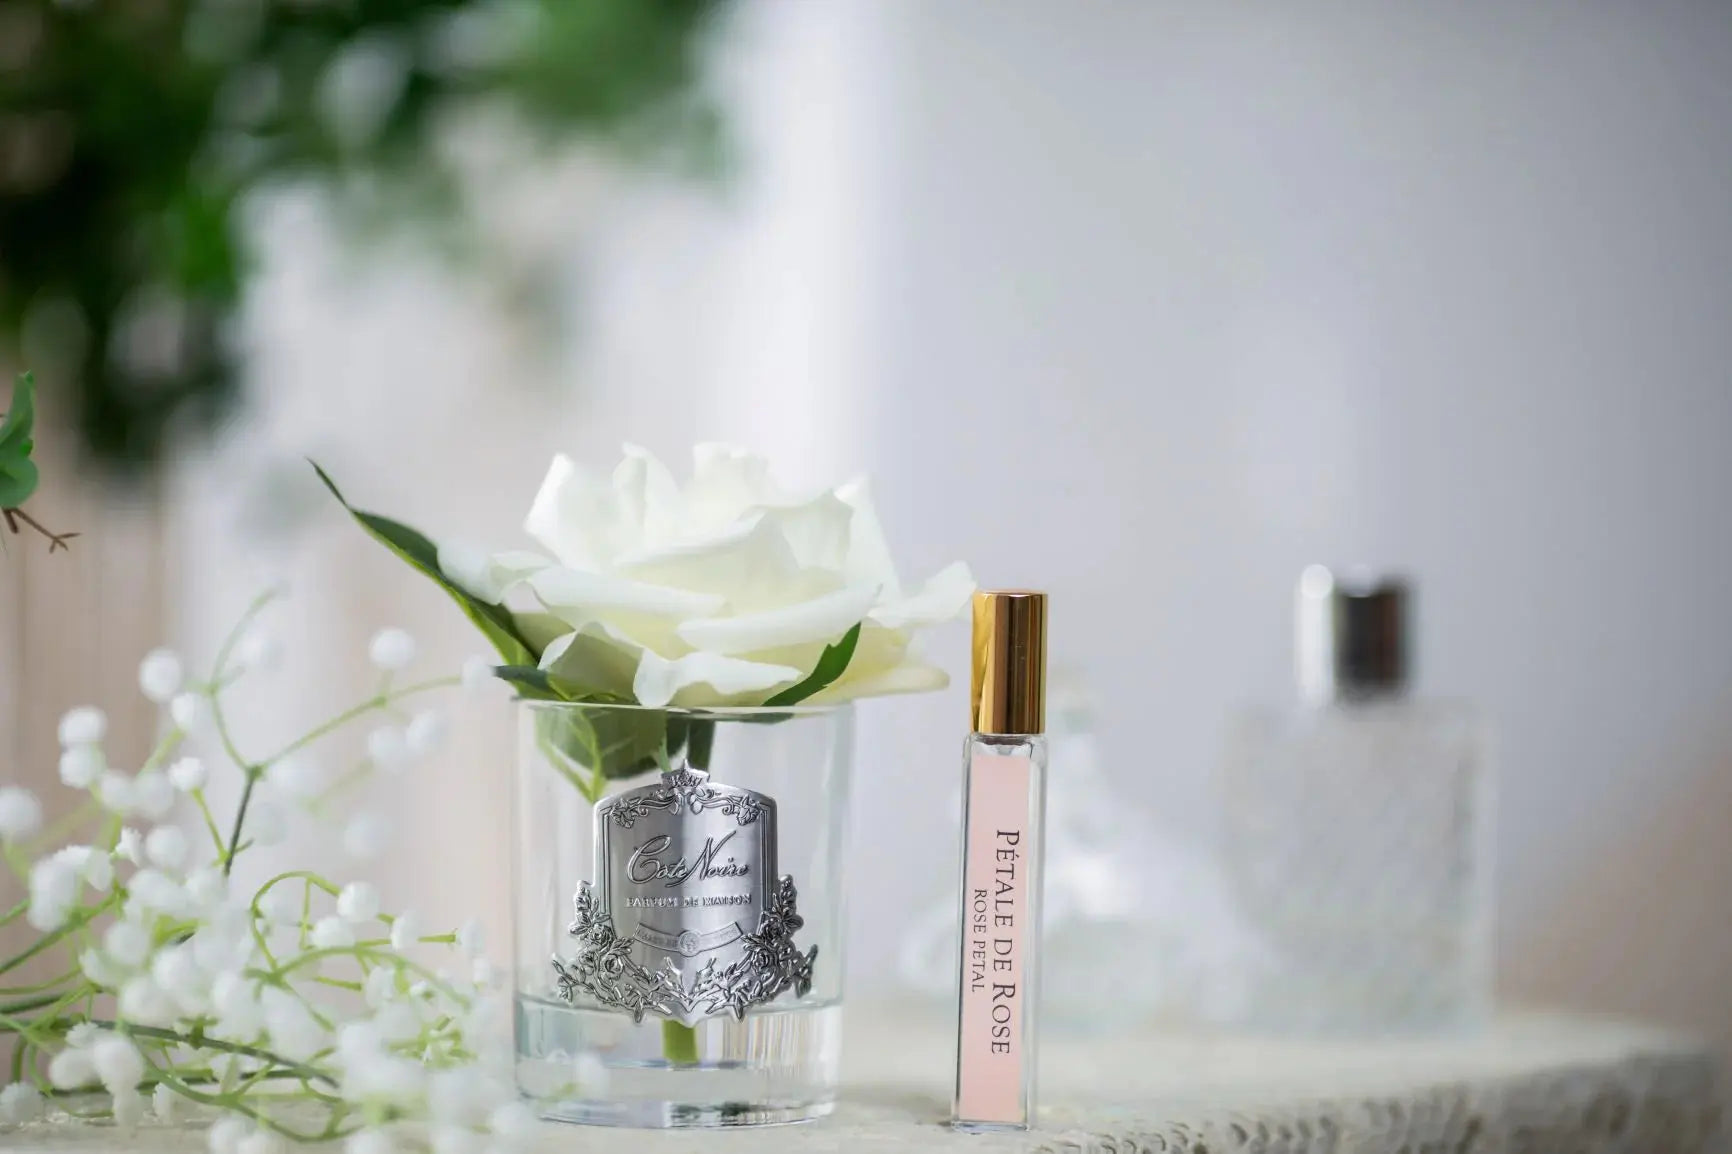 A Cote Noire product featuring a single white artificial rose in a clear glass jar with a silver label, alongside a small vial of perfume labeled 'Pétale de Rose' with a gold cap. The items are elegantly displayed on a lace surface, with a blurred background of greenery and additional perfume bottles, creating a delicate and luxurious setting.